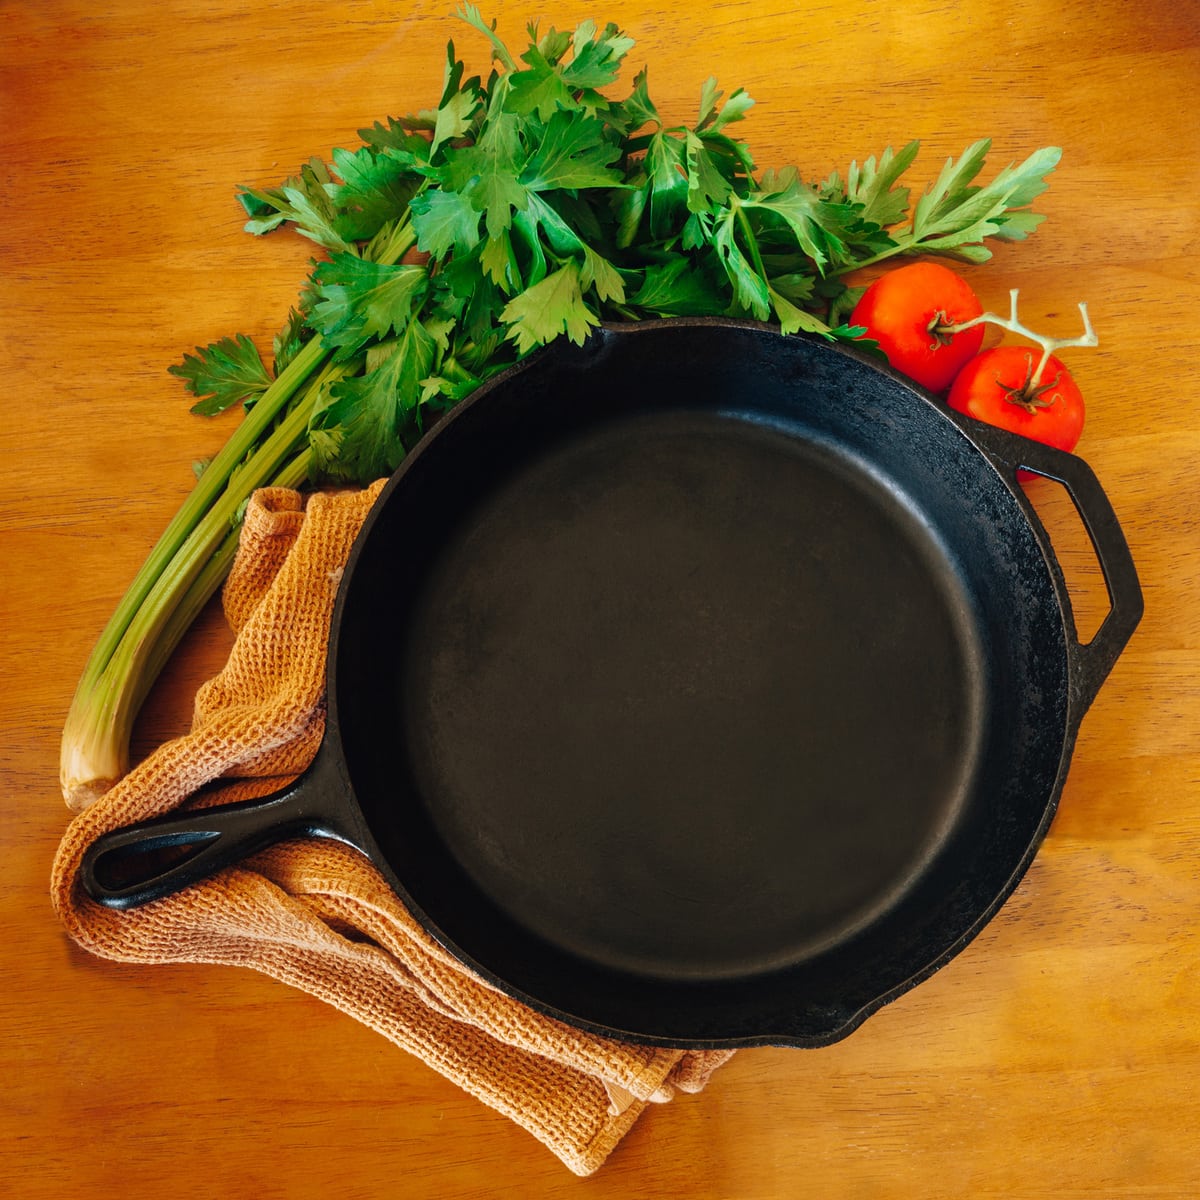 Cast iron pan and vegetables on a wooden table